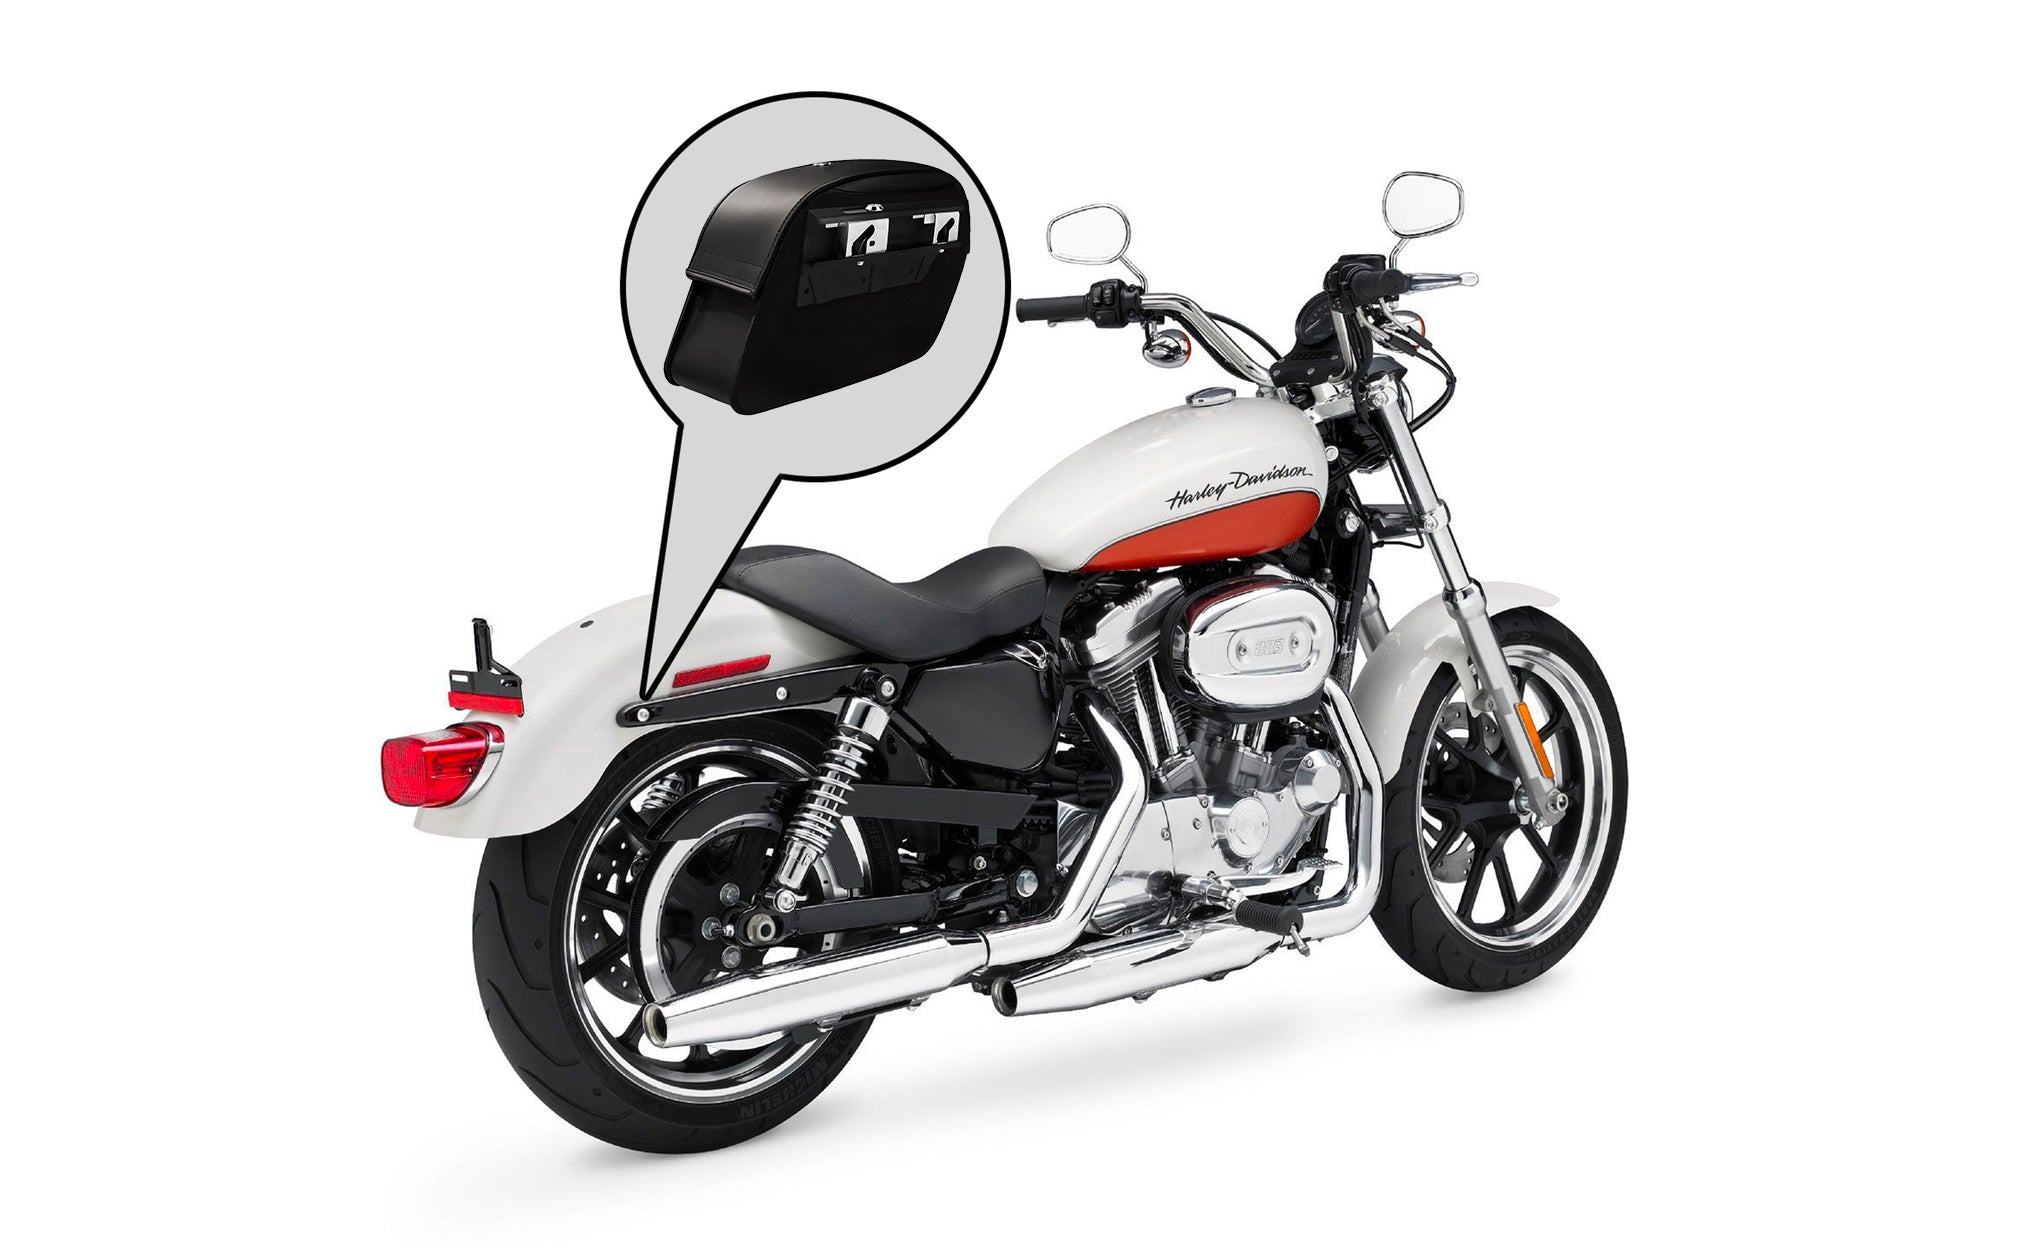 Viking Saddlebags Quick Disconnect System For Yamaha Roadstar @expand